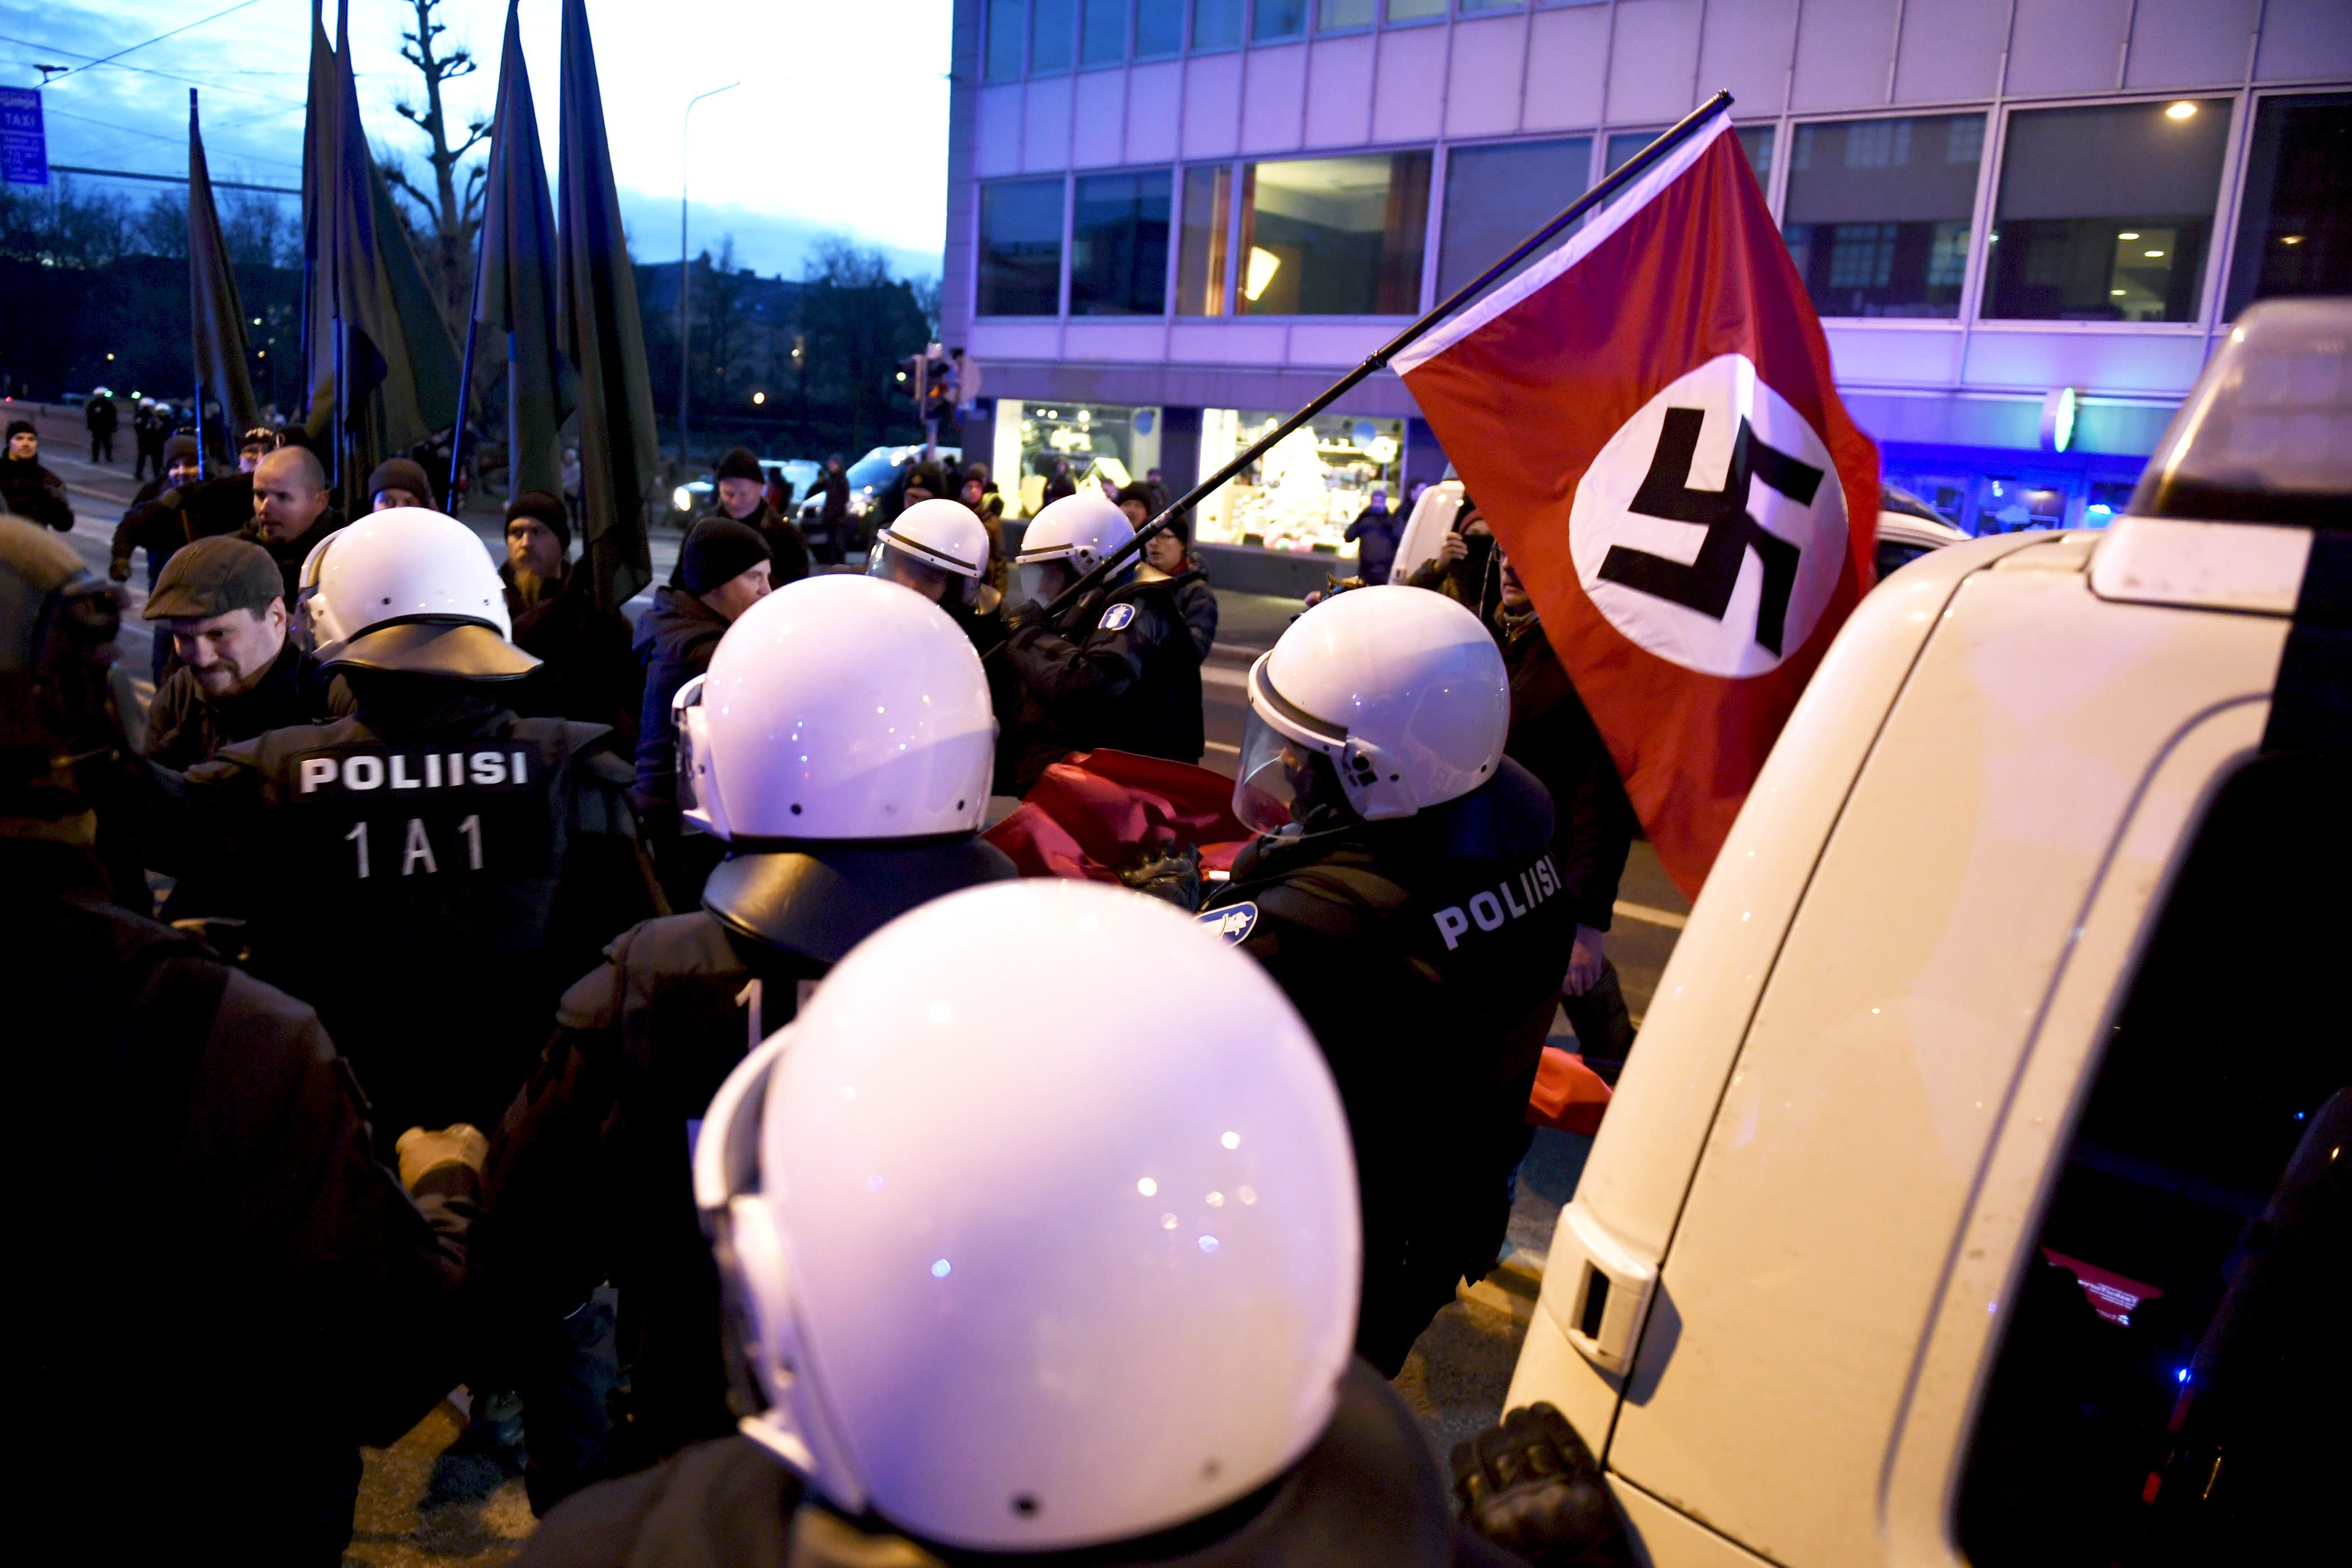 Prosecutors filed charges against neo-Nazi members "Towards freedom" group